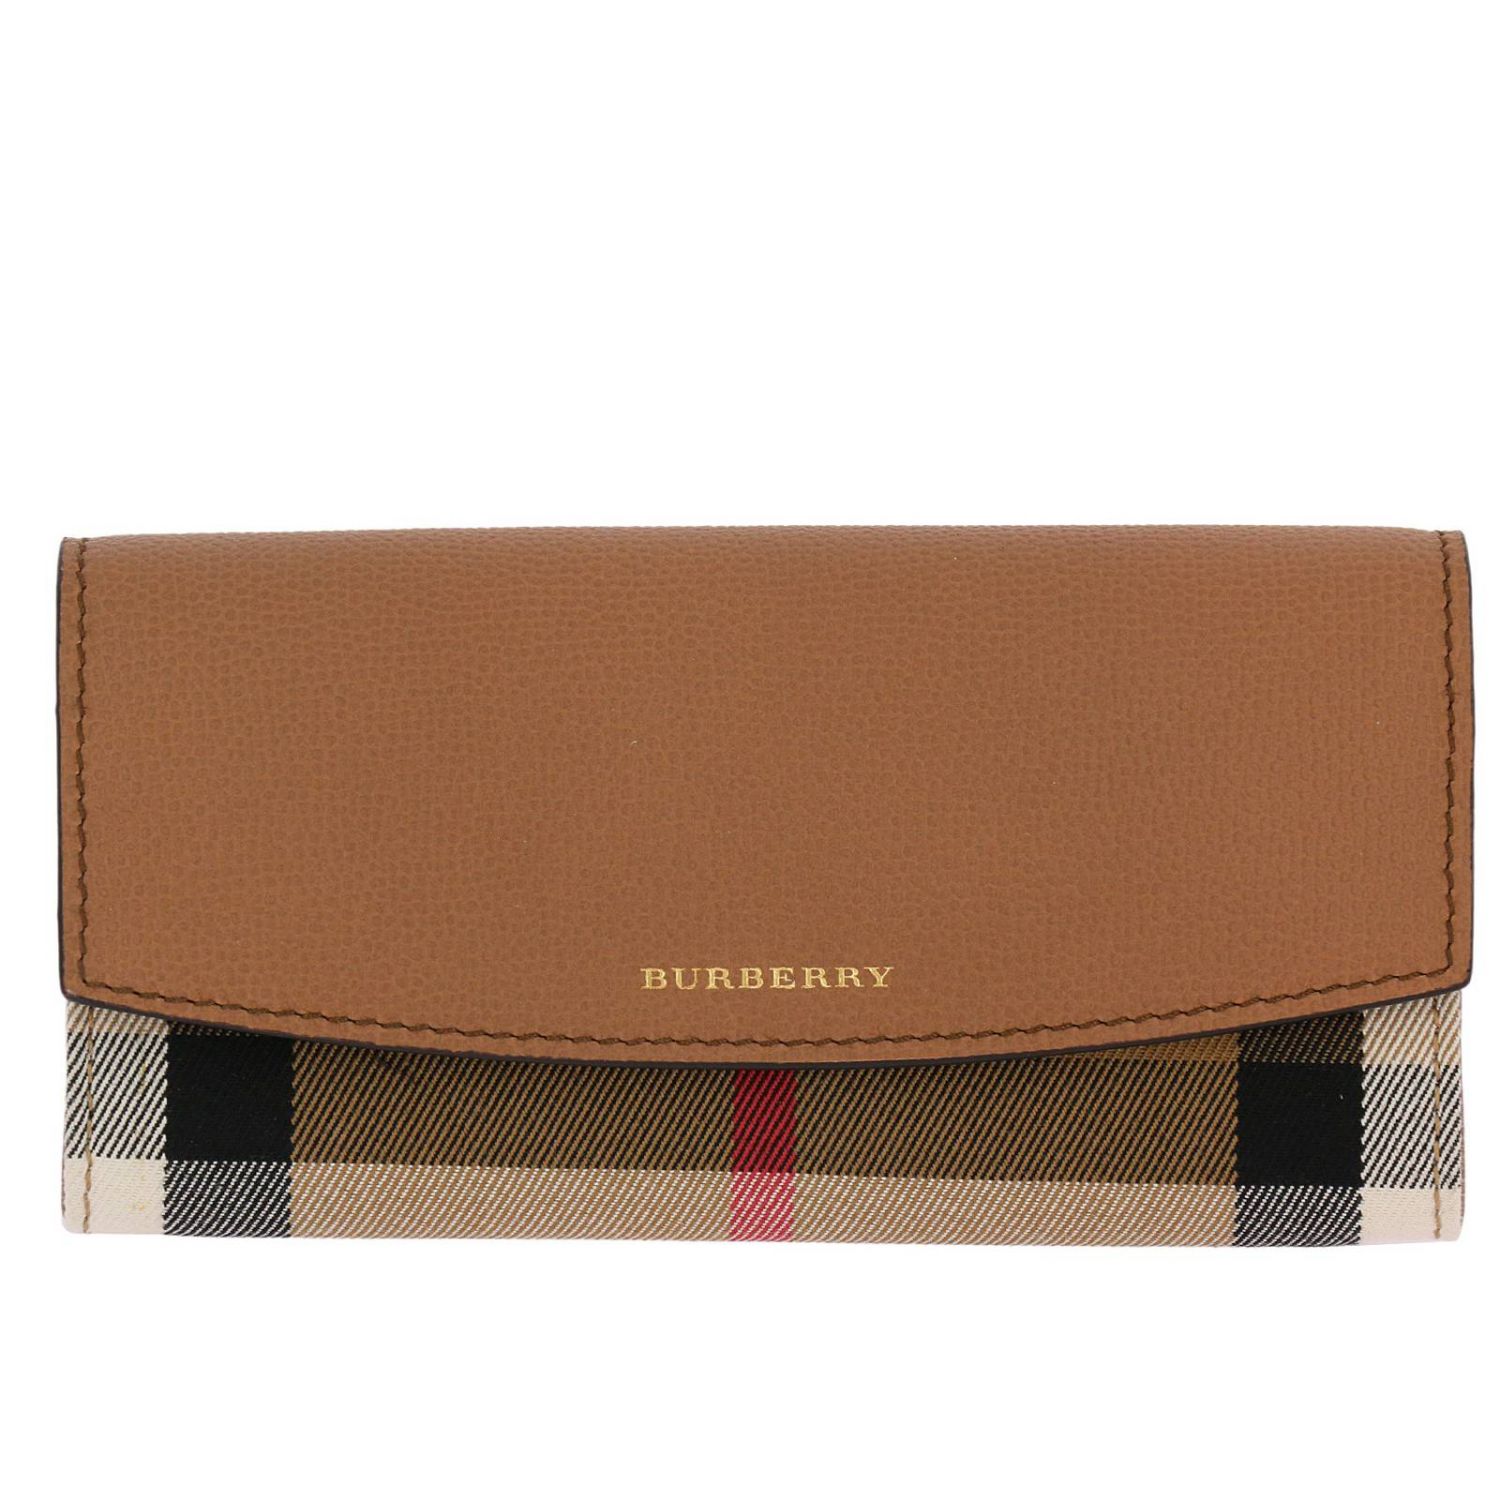 Burberry Outlet: Wallet women - Sand | Wallet Burberry 3955509 GIGLIO.COM